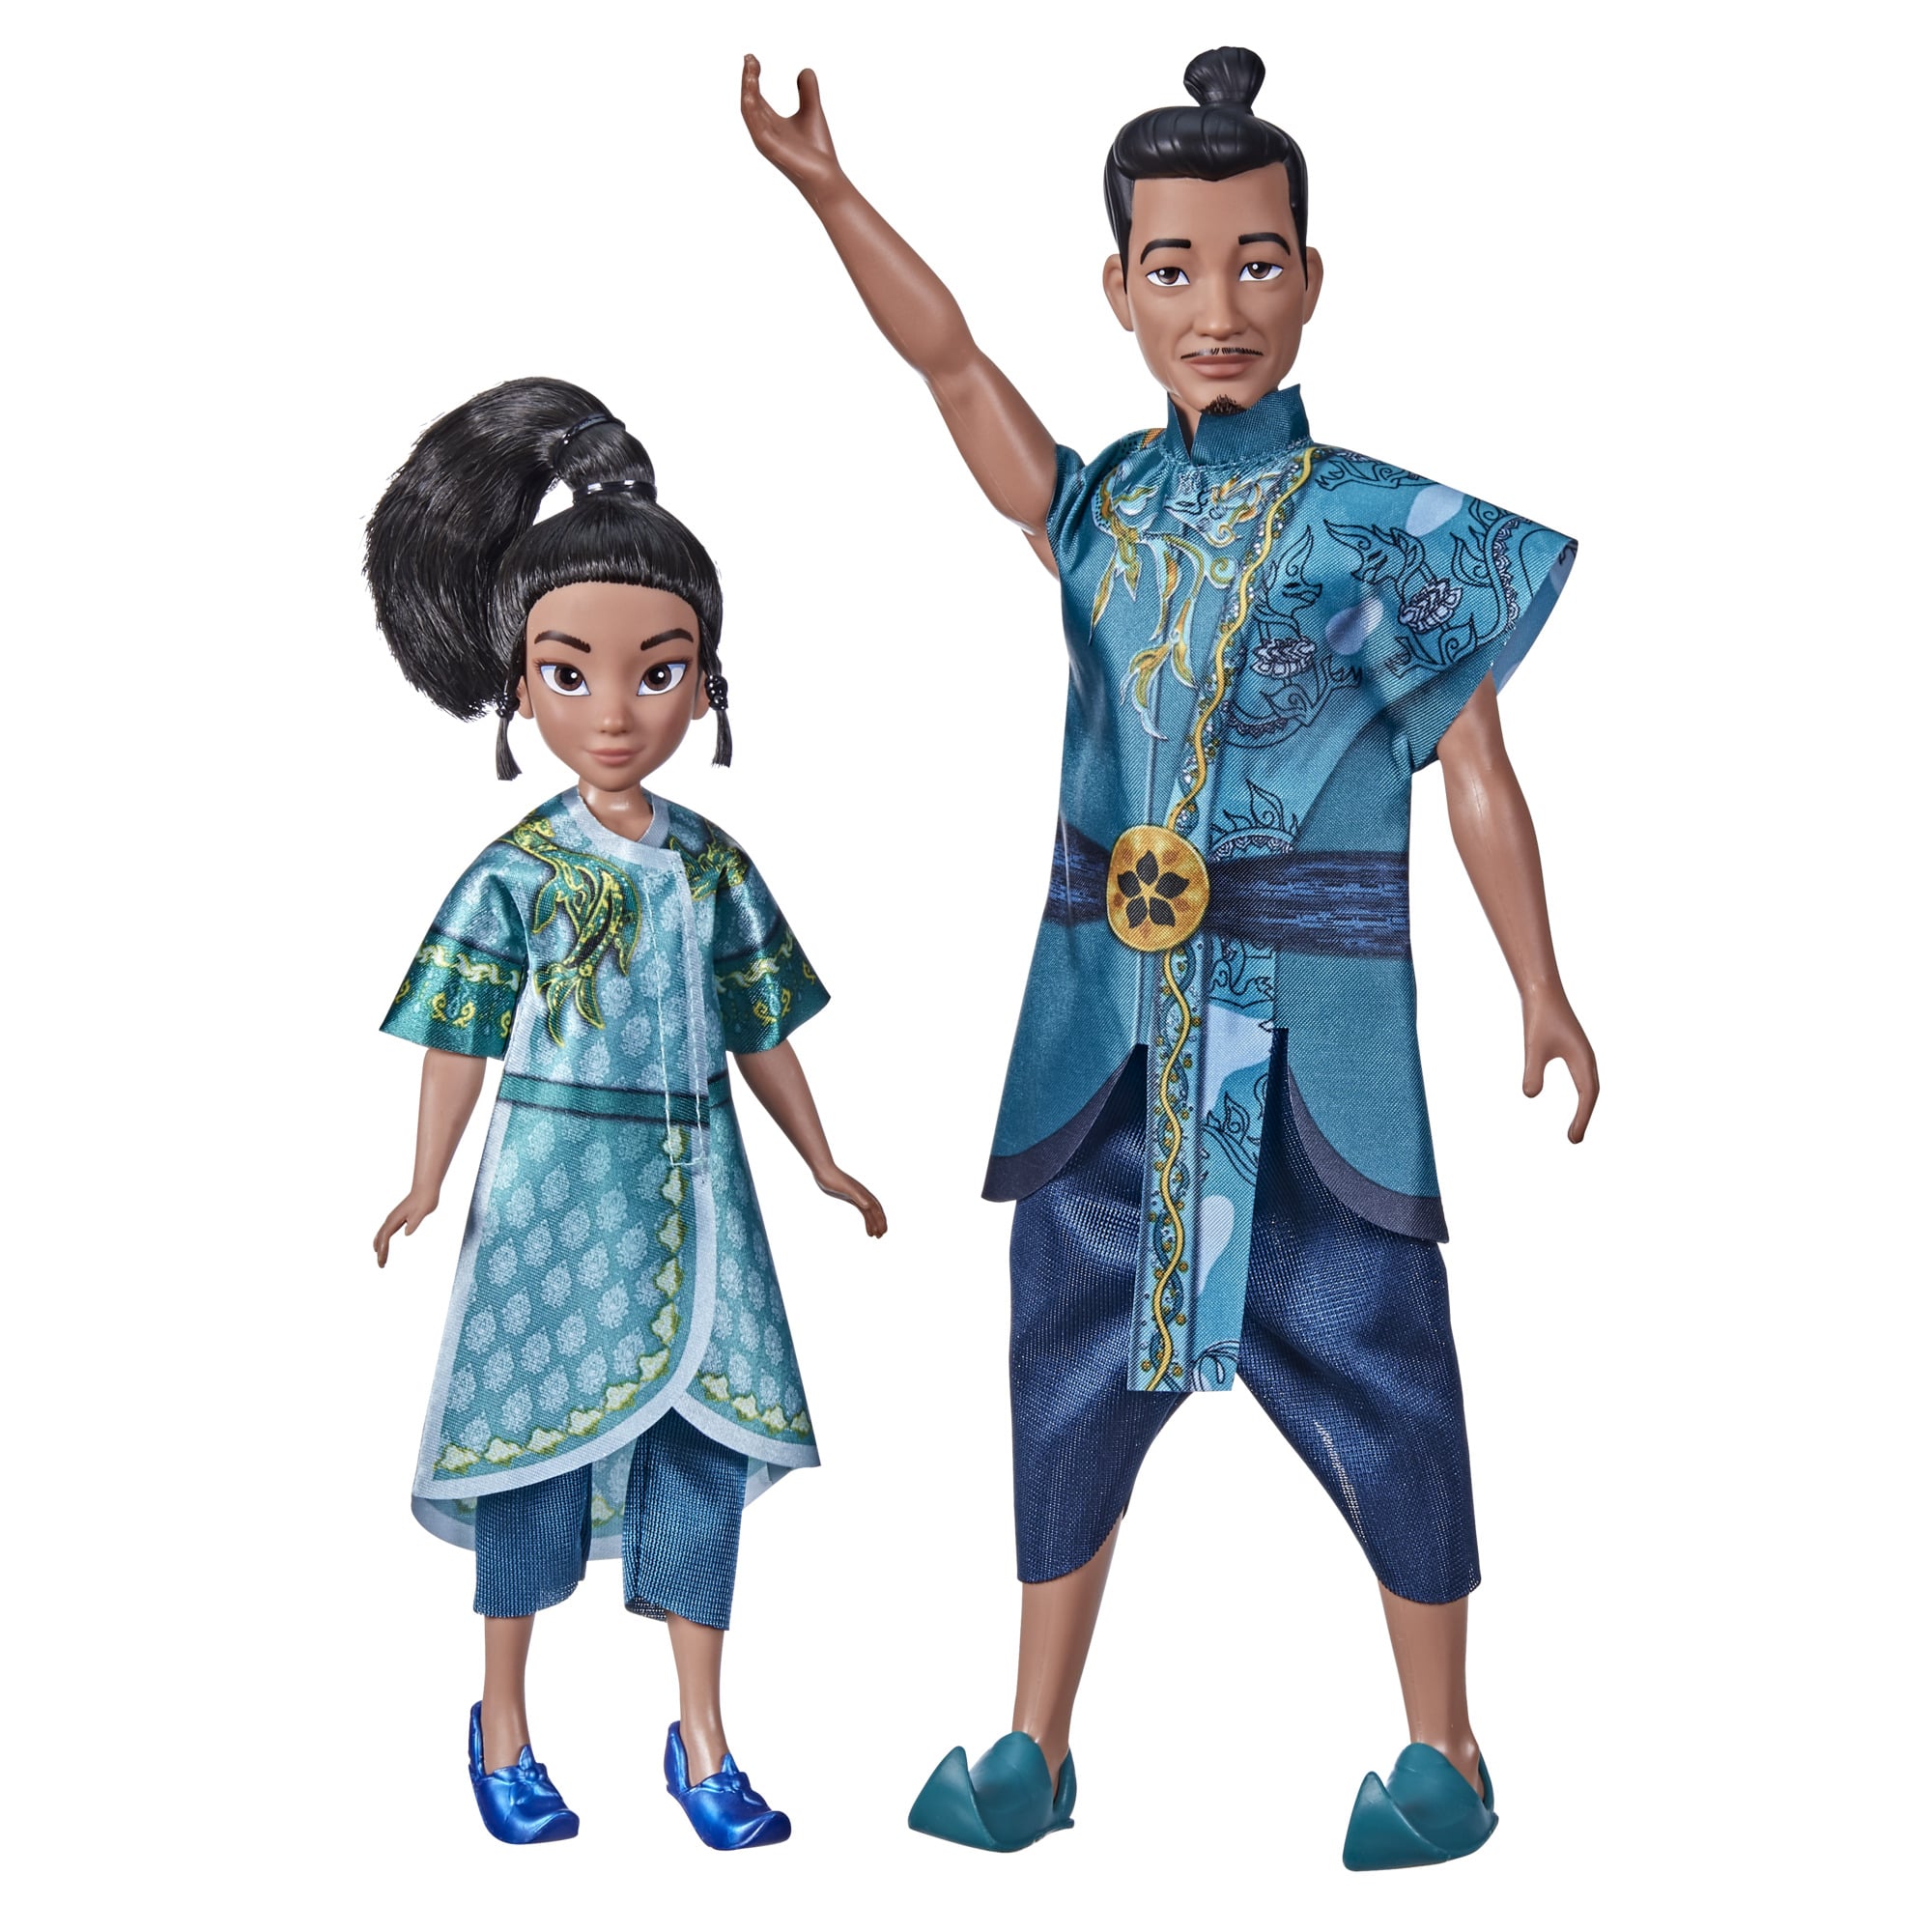 Disney's Raya and the Last Dragon Toys, Dolls, and Books